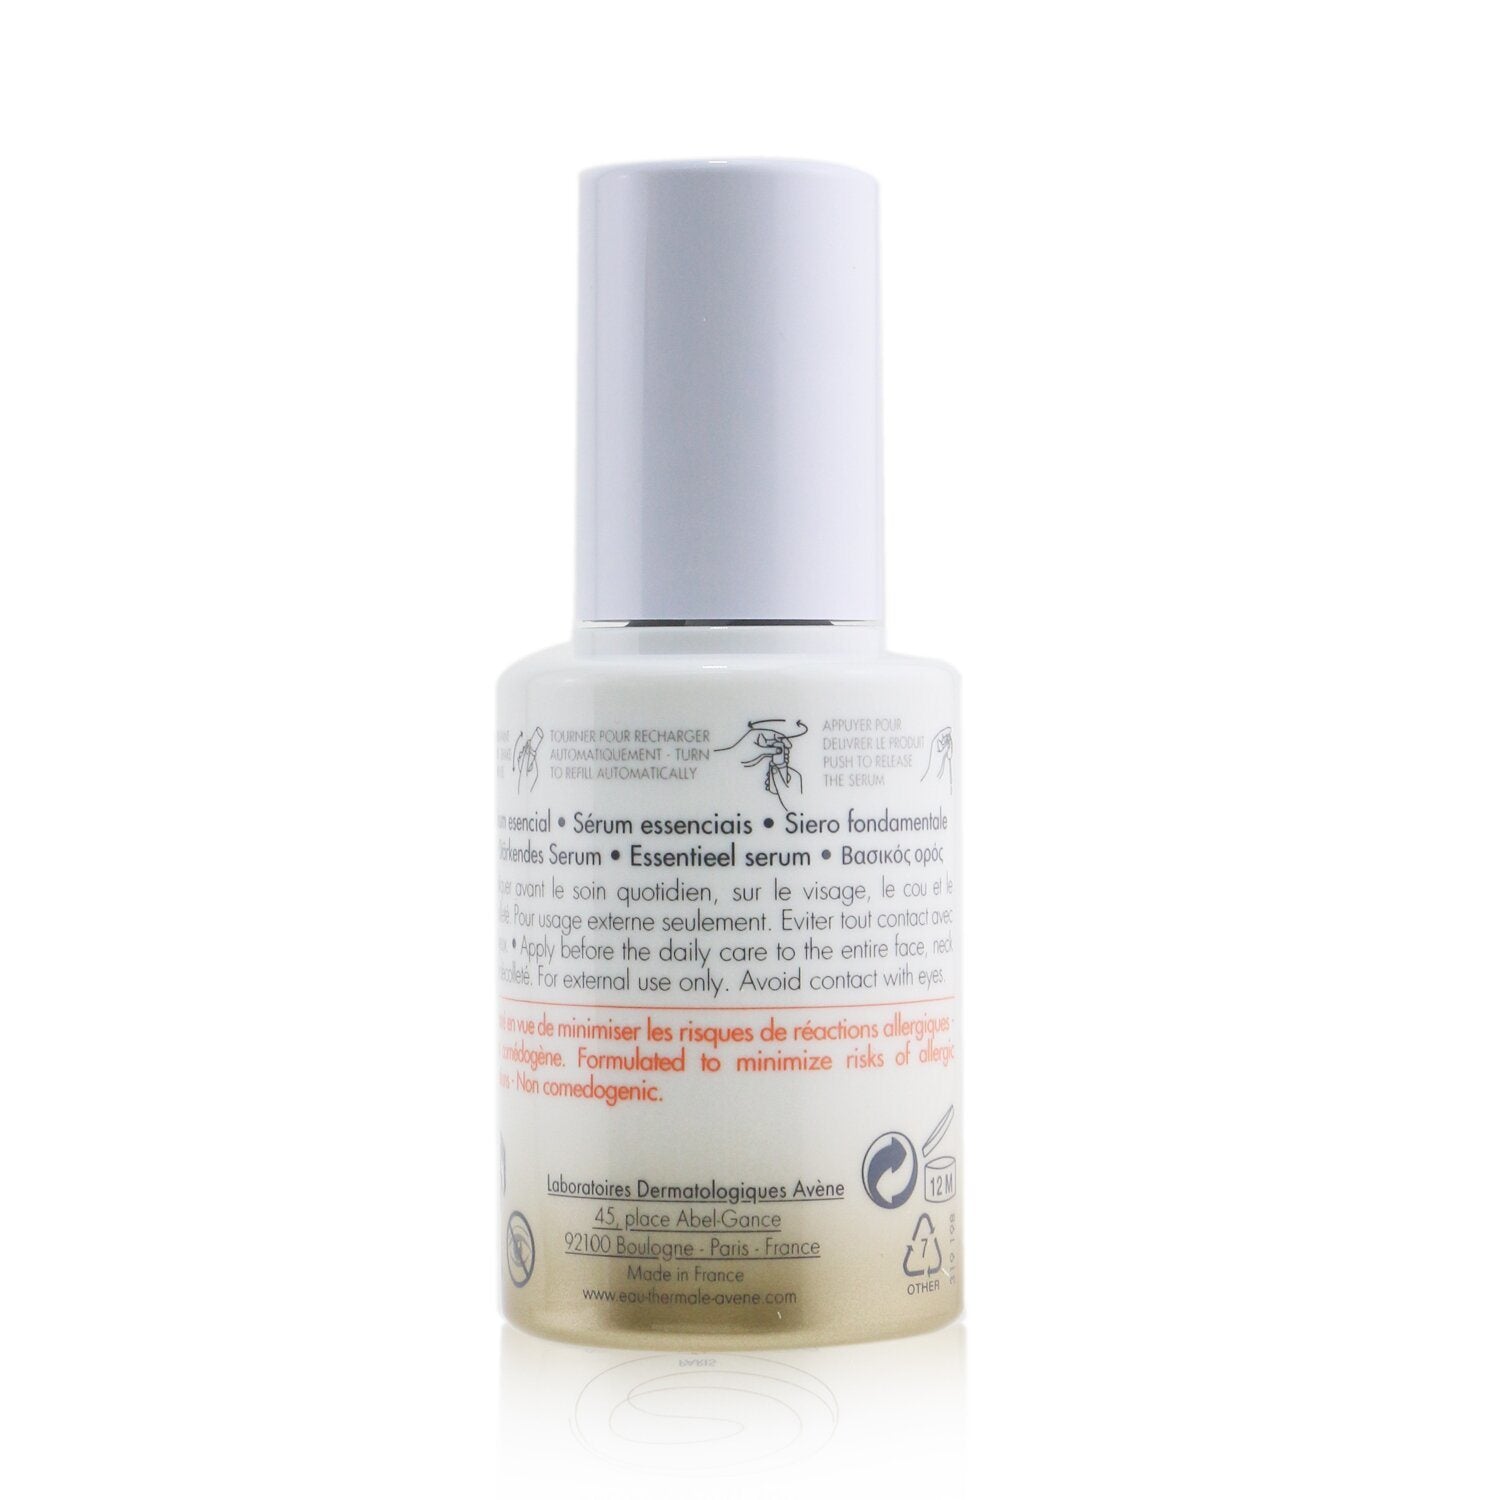 A bottle of Avène DermAbsolu SERUM Recontouring Serum, enriched with Vanilla Polyphenols, on a white background.